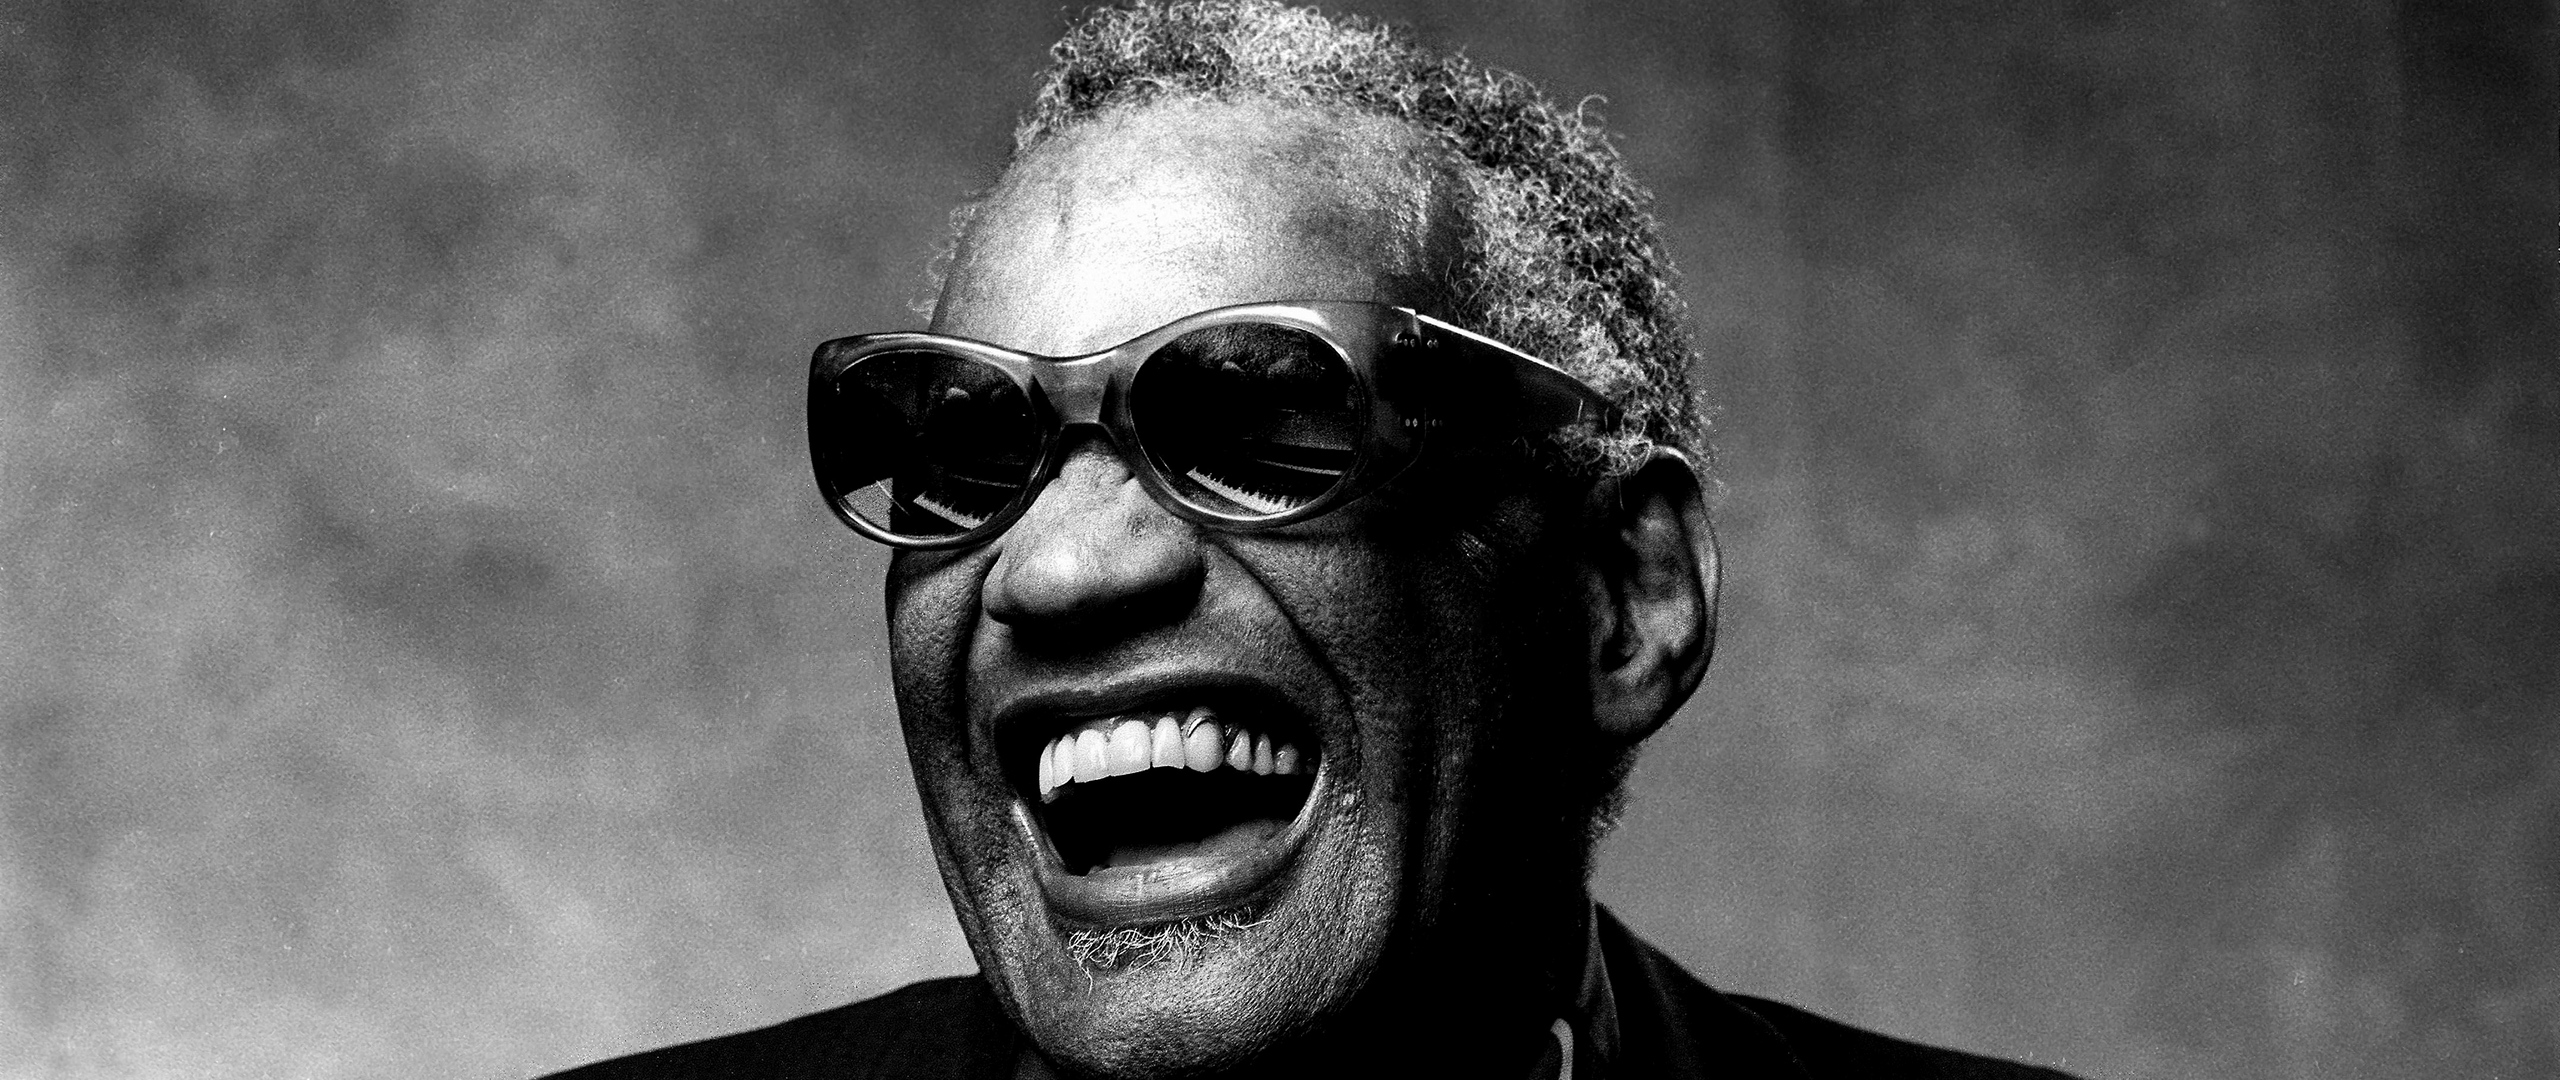 Download wallpaper 2560x1080 ray charles, musician, author, soul